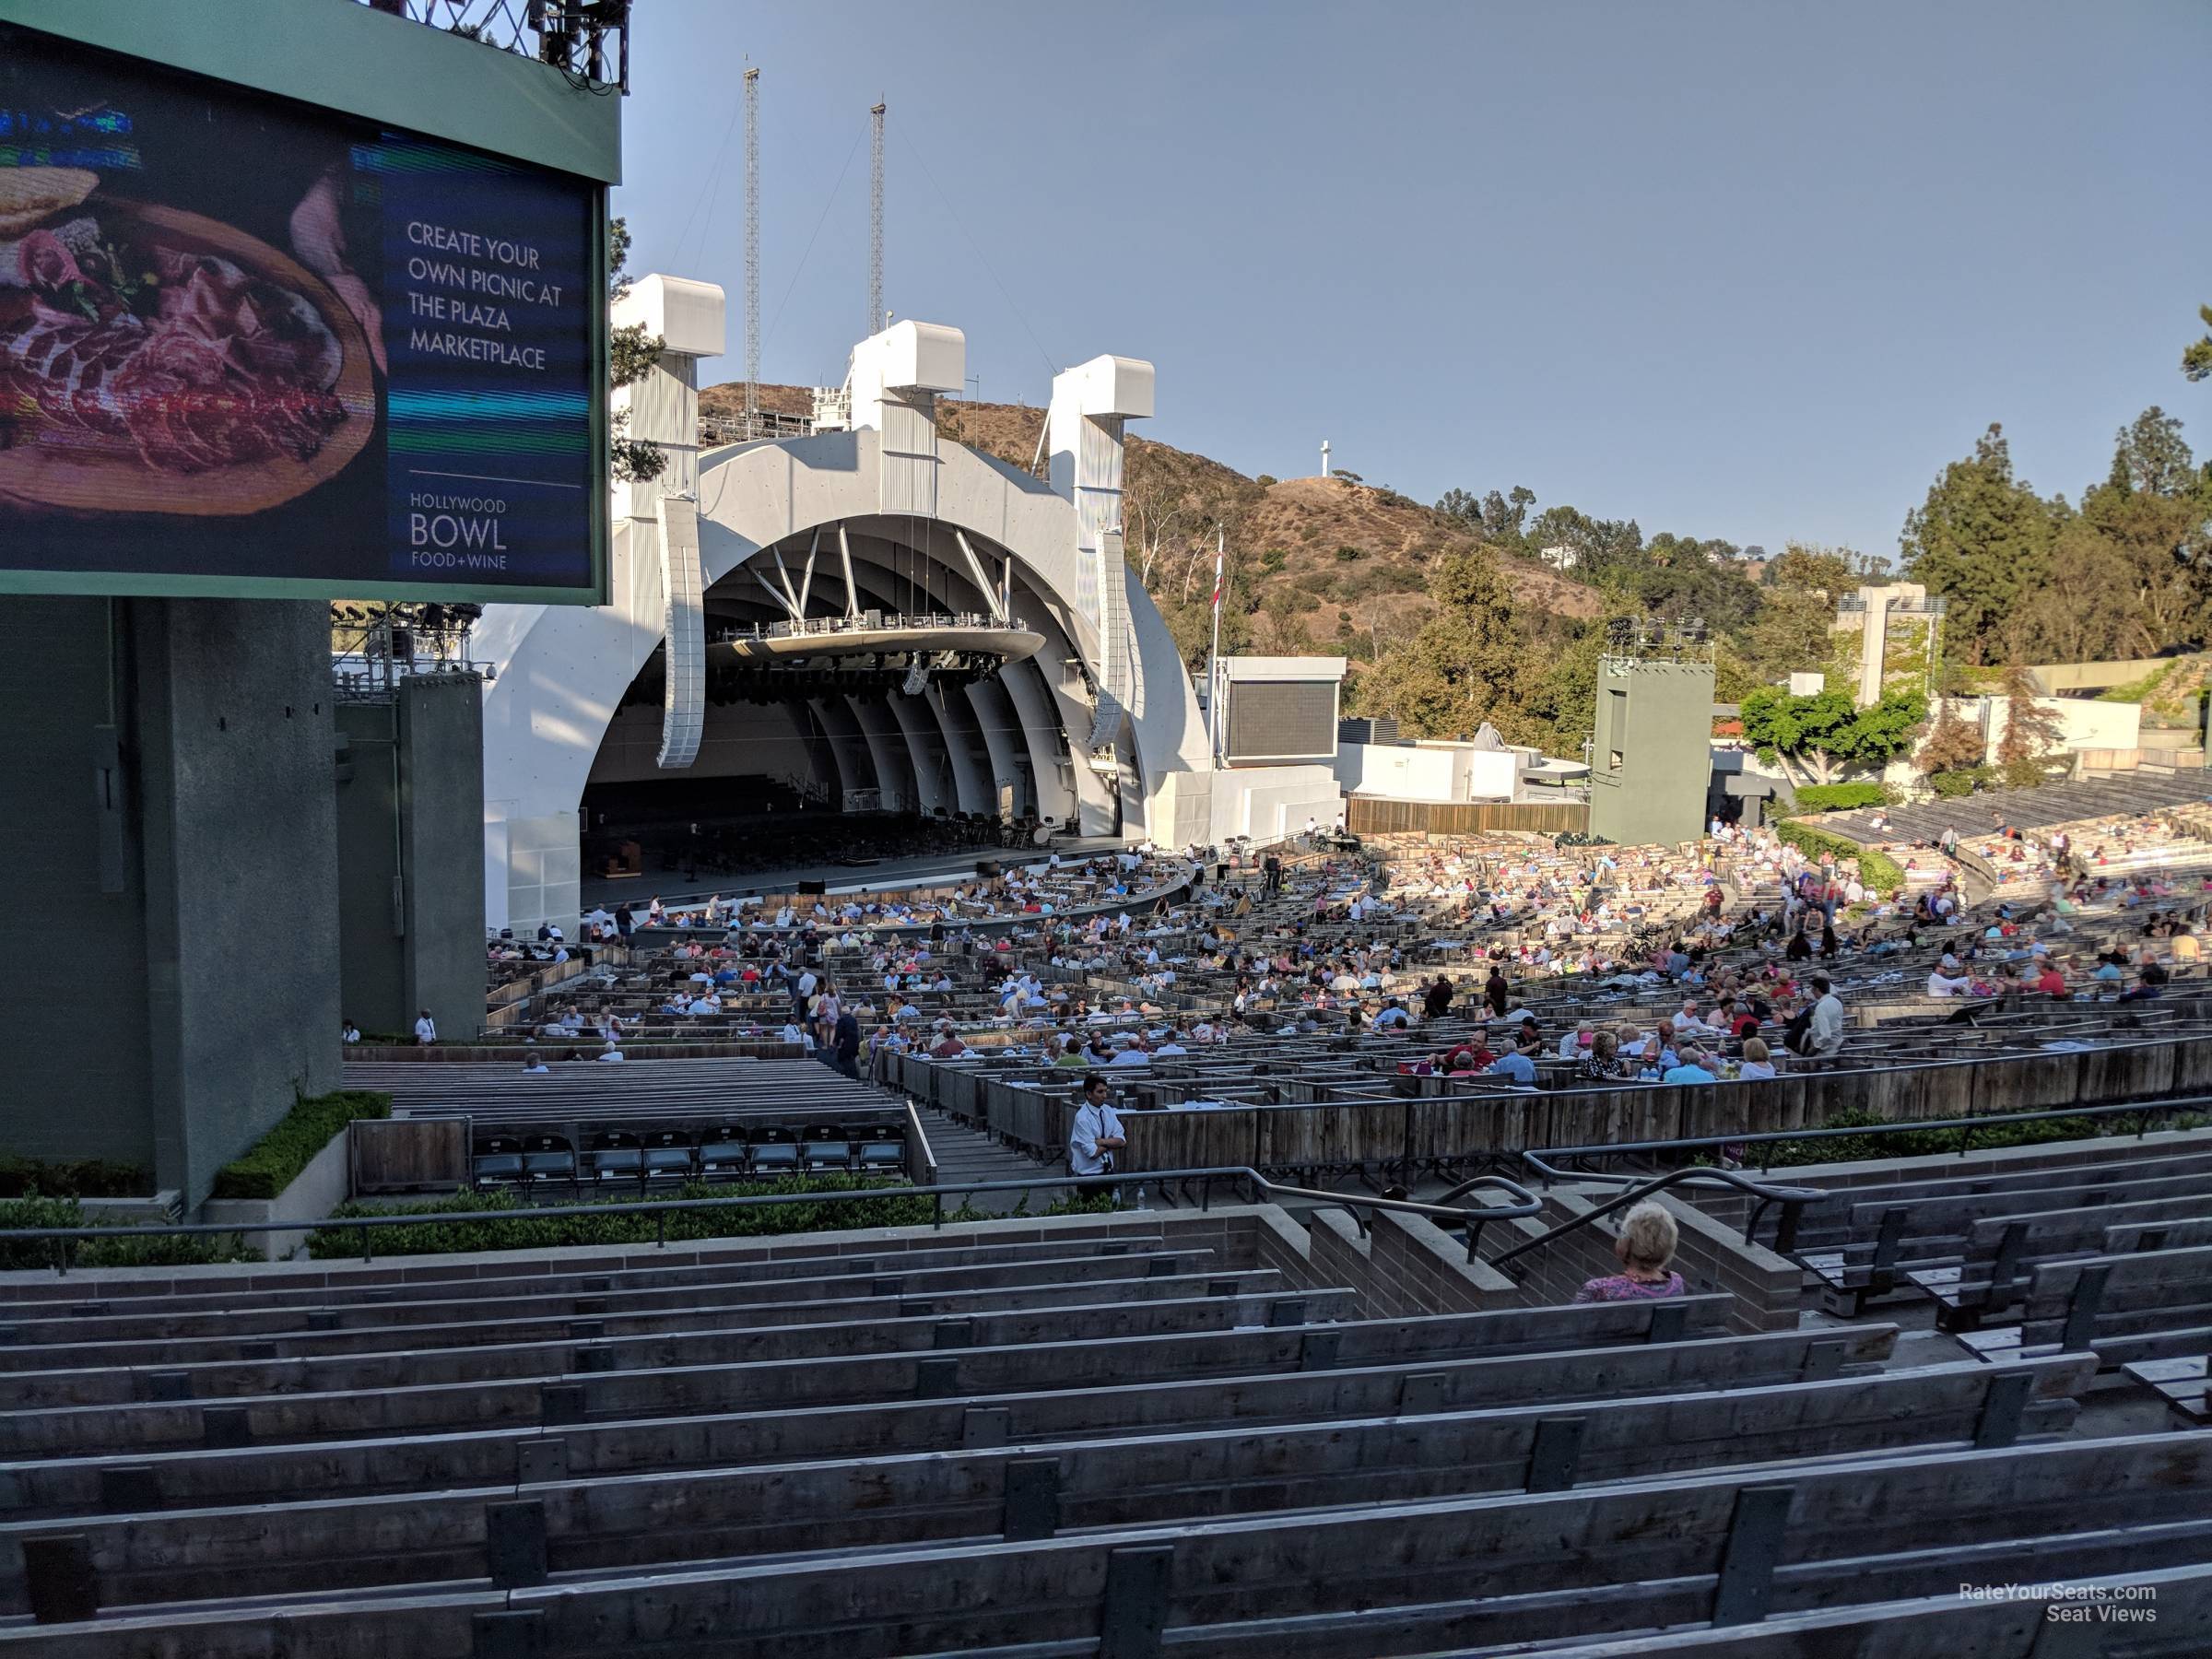 section k3, row 13 seat view  - hollywood bowl